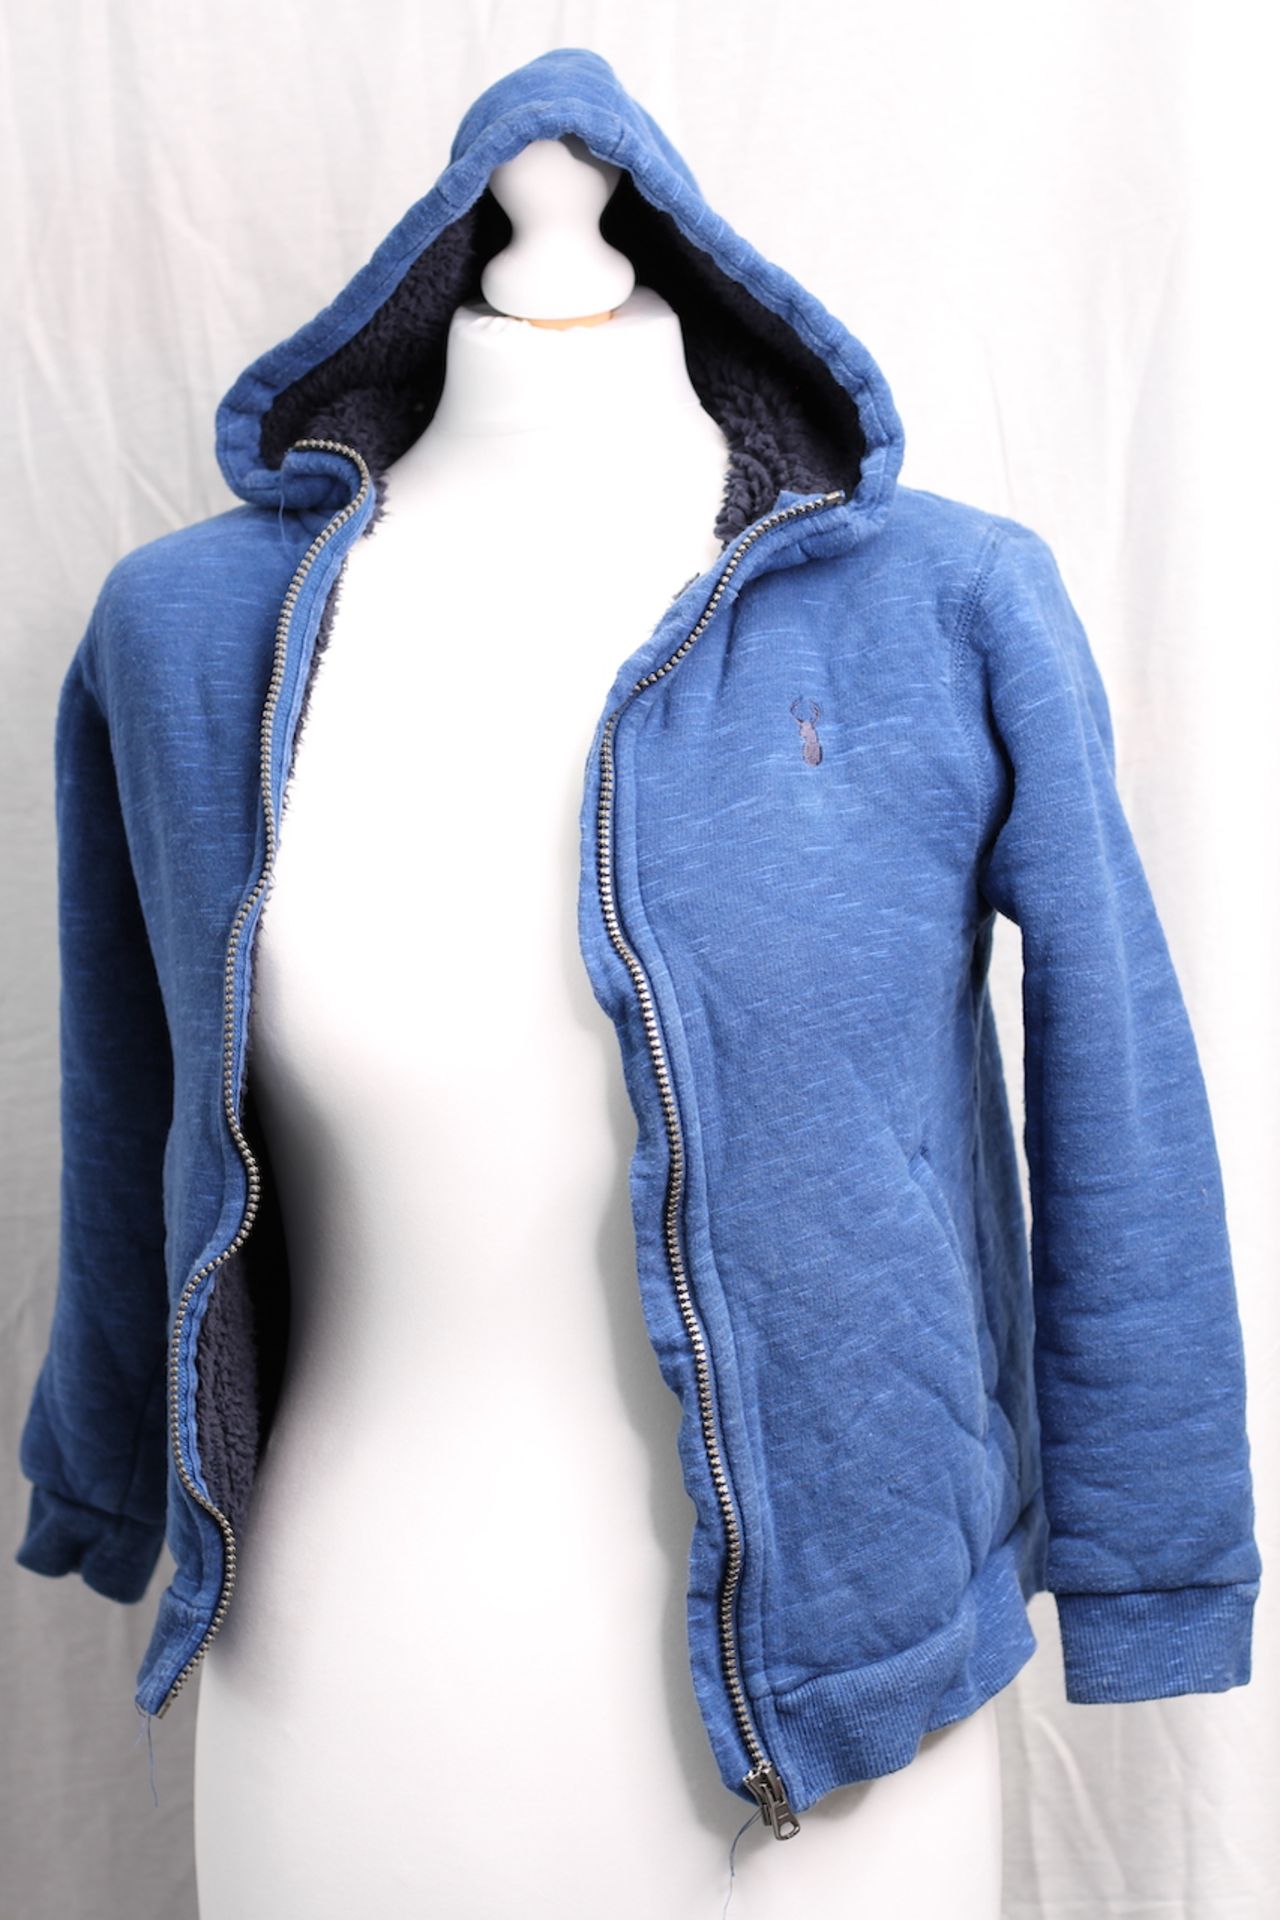 NEXT CHILDS HOODY, Colour : ROYAL BLUE, AGE: 9, SIZE: UNKNOWN, CONDITION GRADE: OK * TO BE SOLD